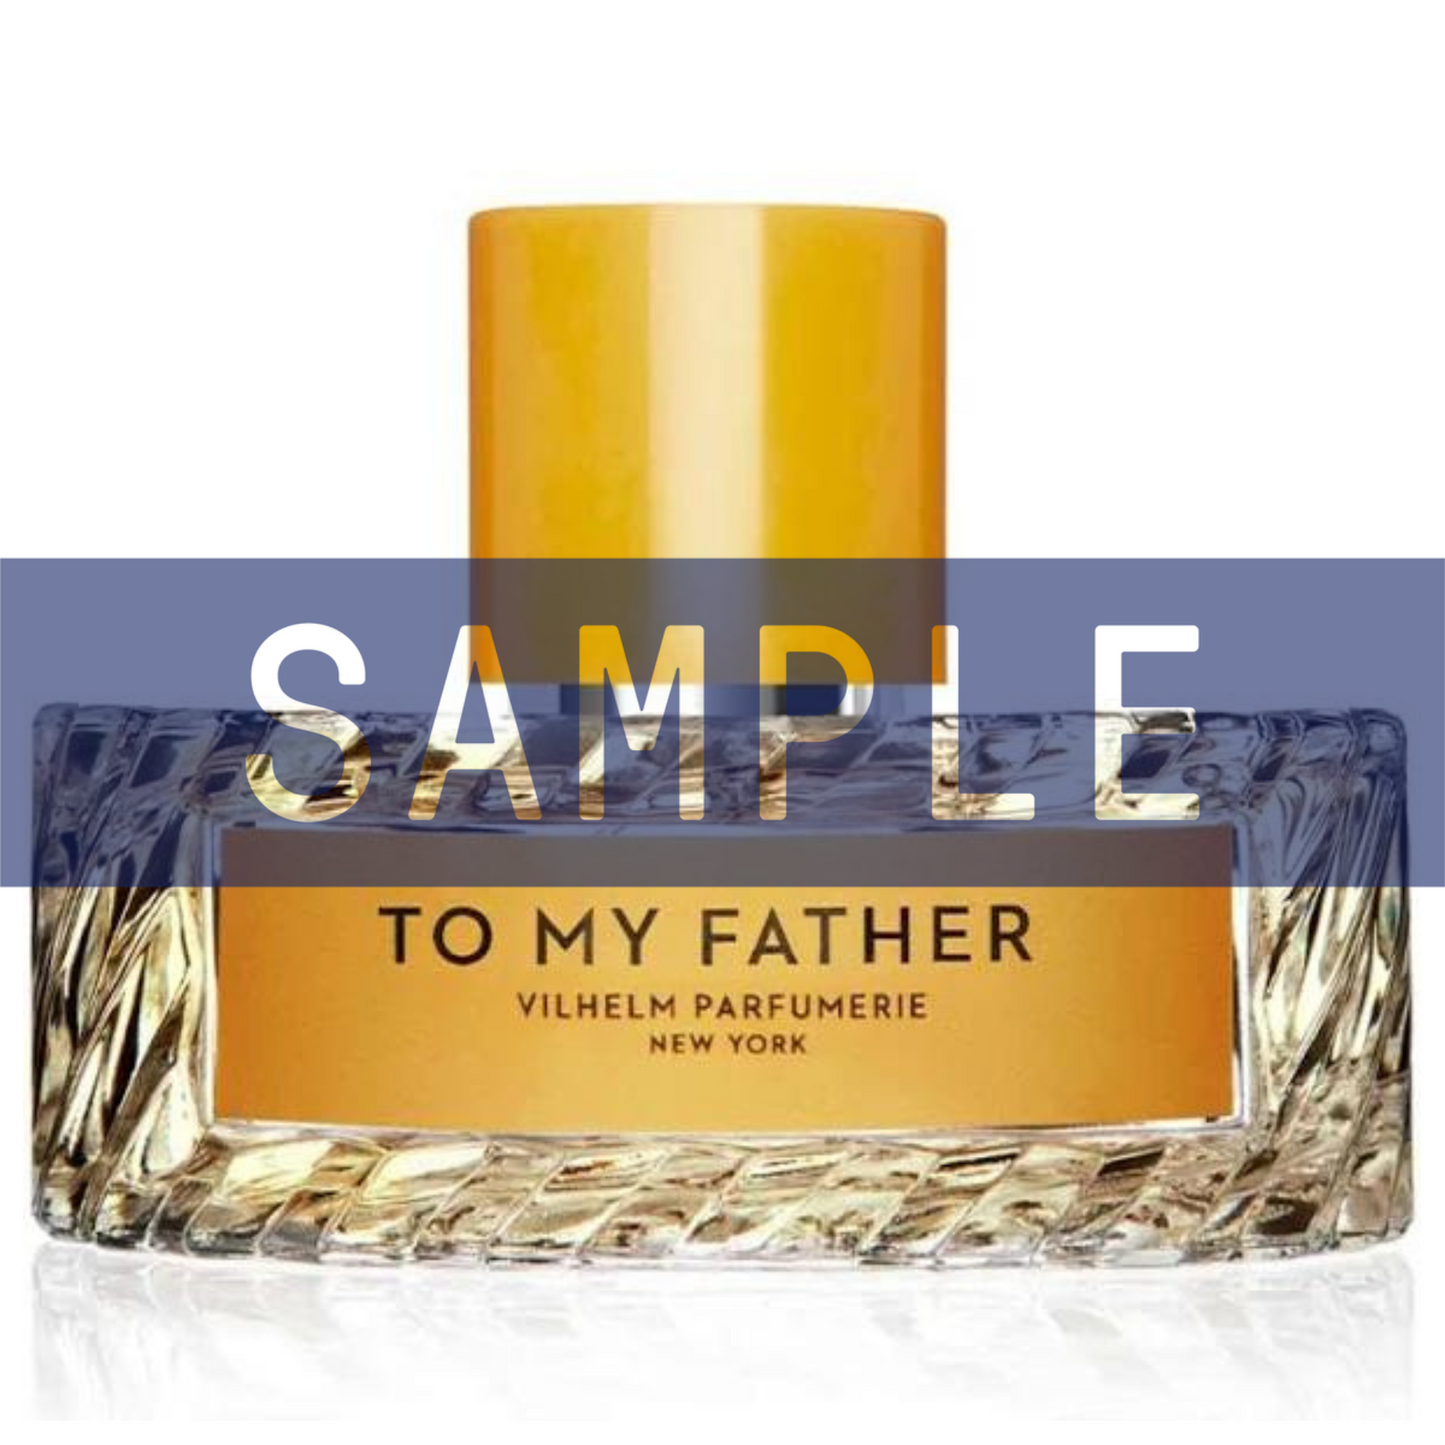 Primary Image of Sample To My Father Eau De Parfum